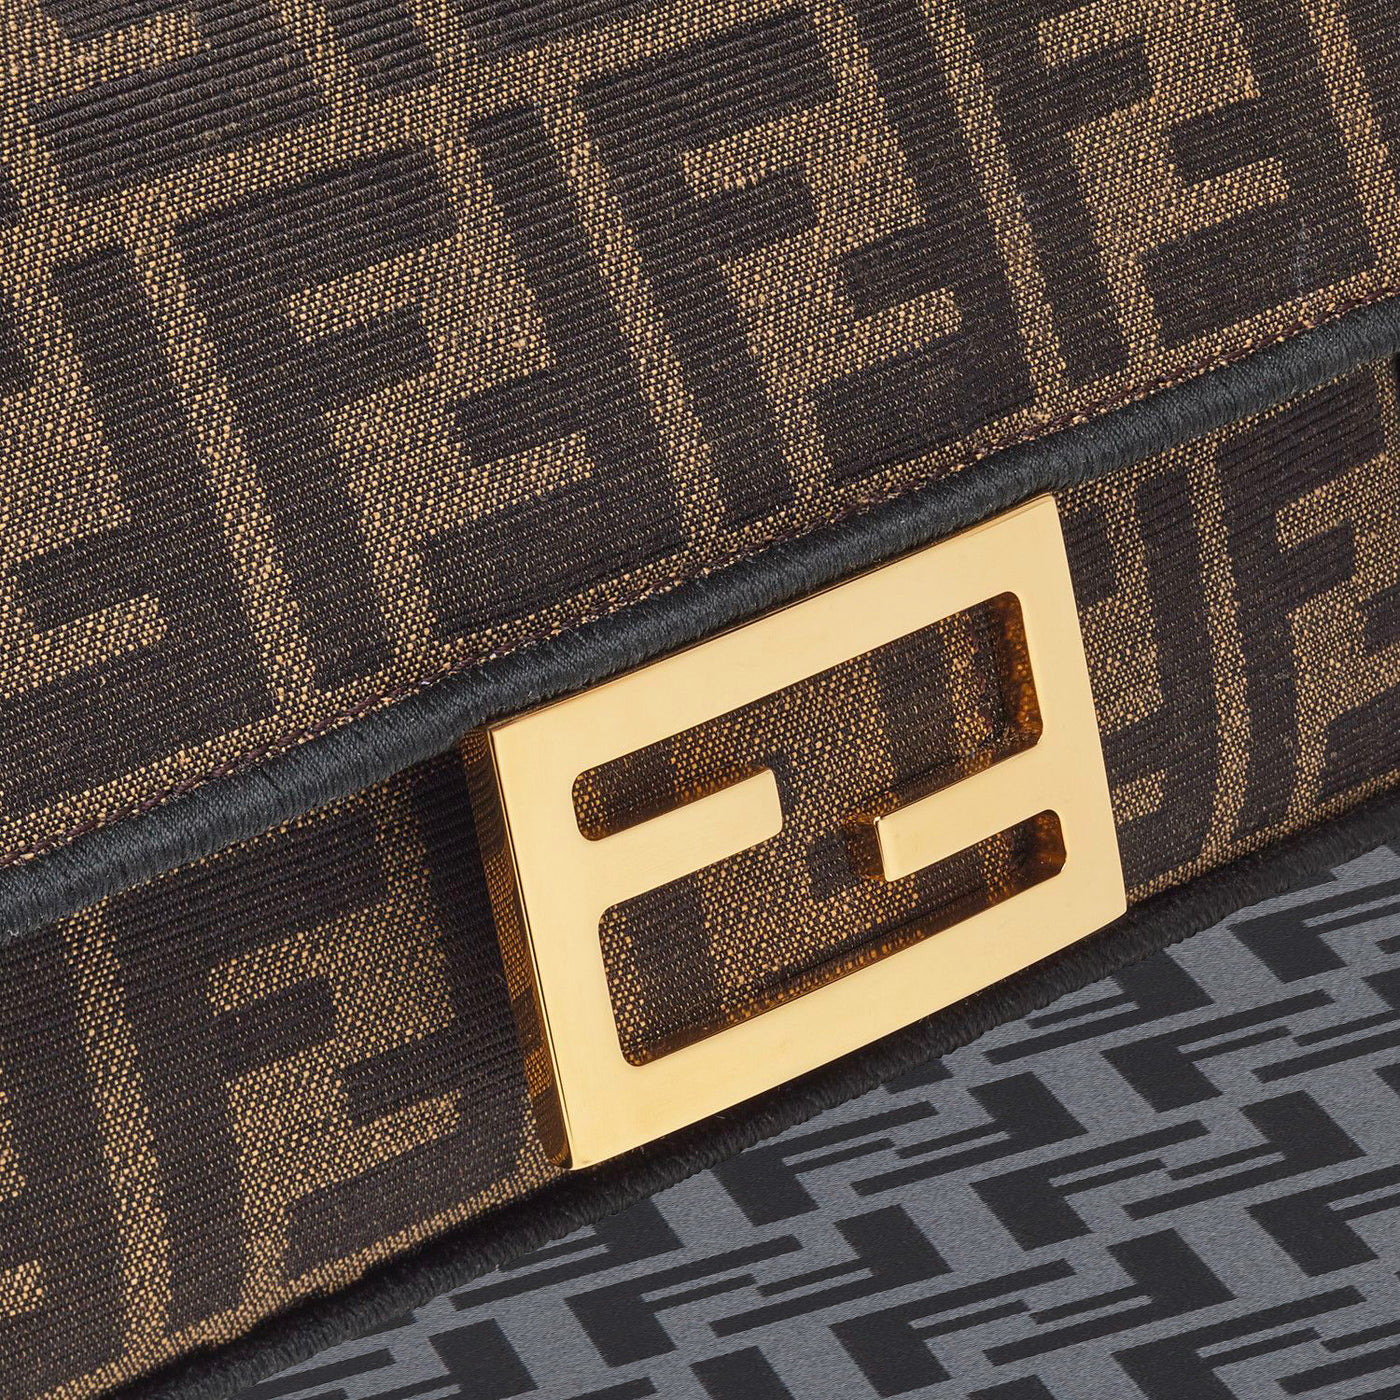 Second hand luxury that the environment: Fendi – Fancy Lux